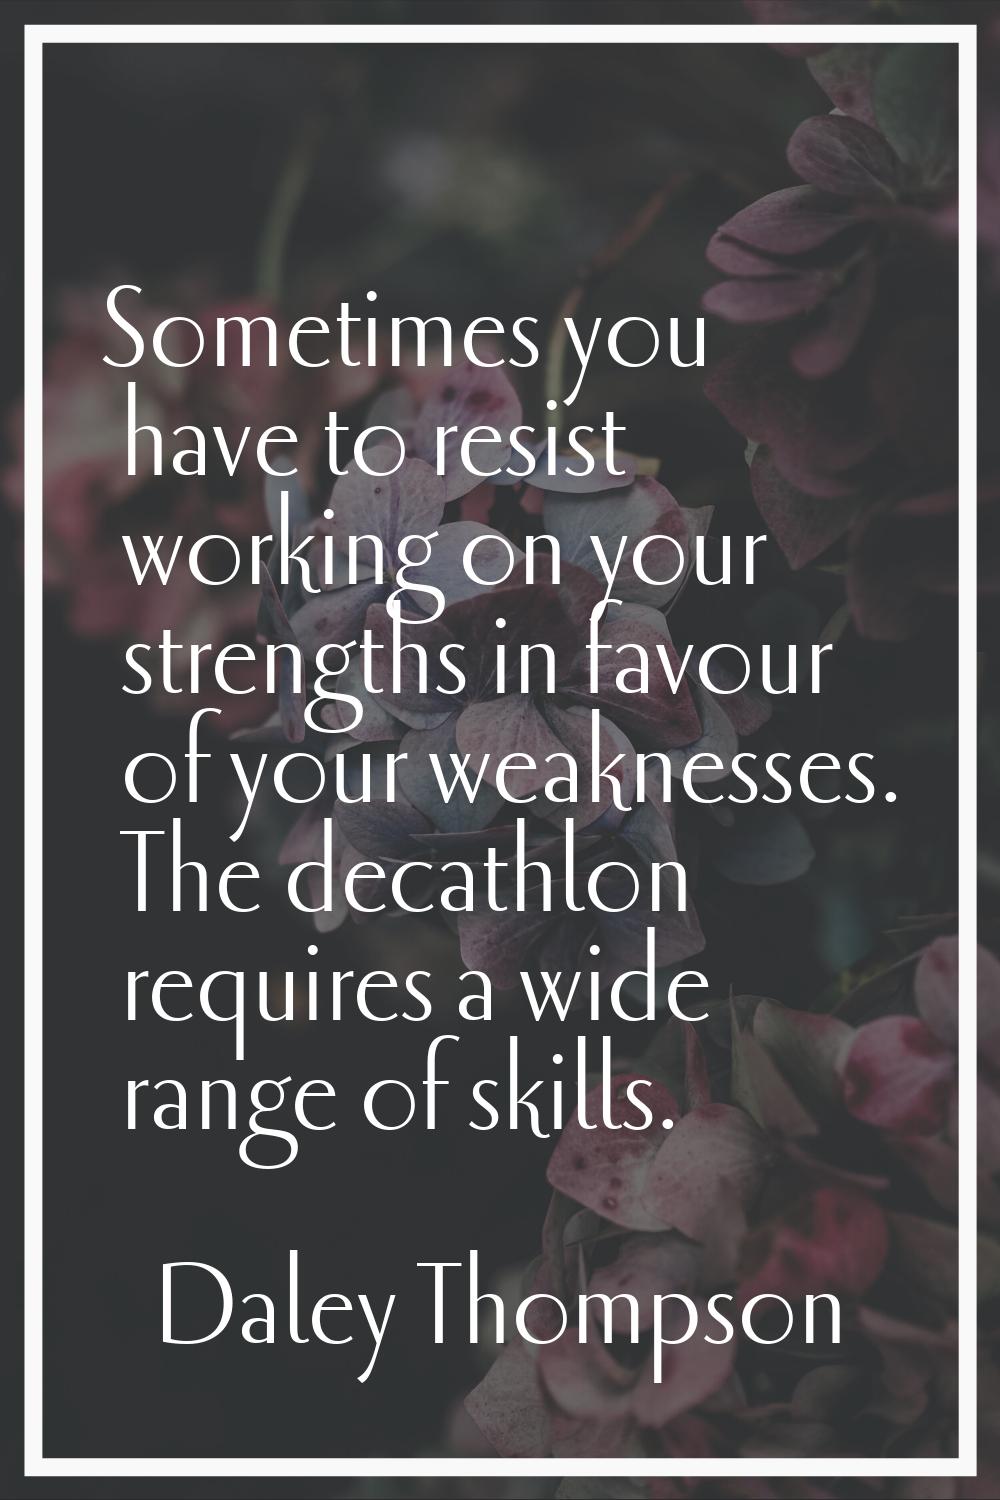 Sometimes you have to resist working on your strengths in favour of your weaknesses. The decathlon 